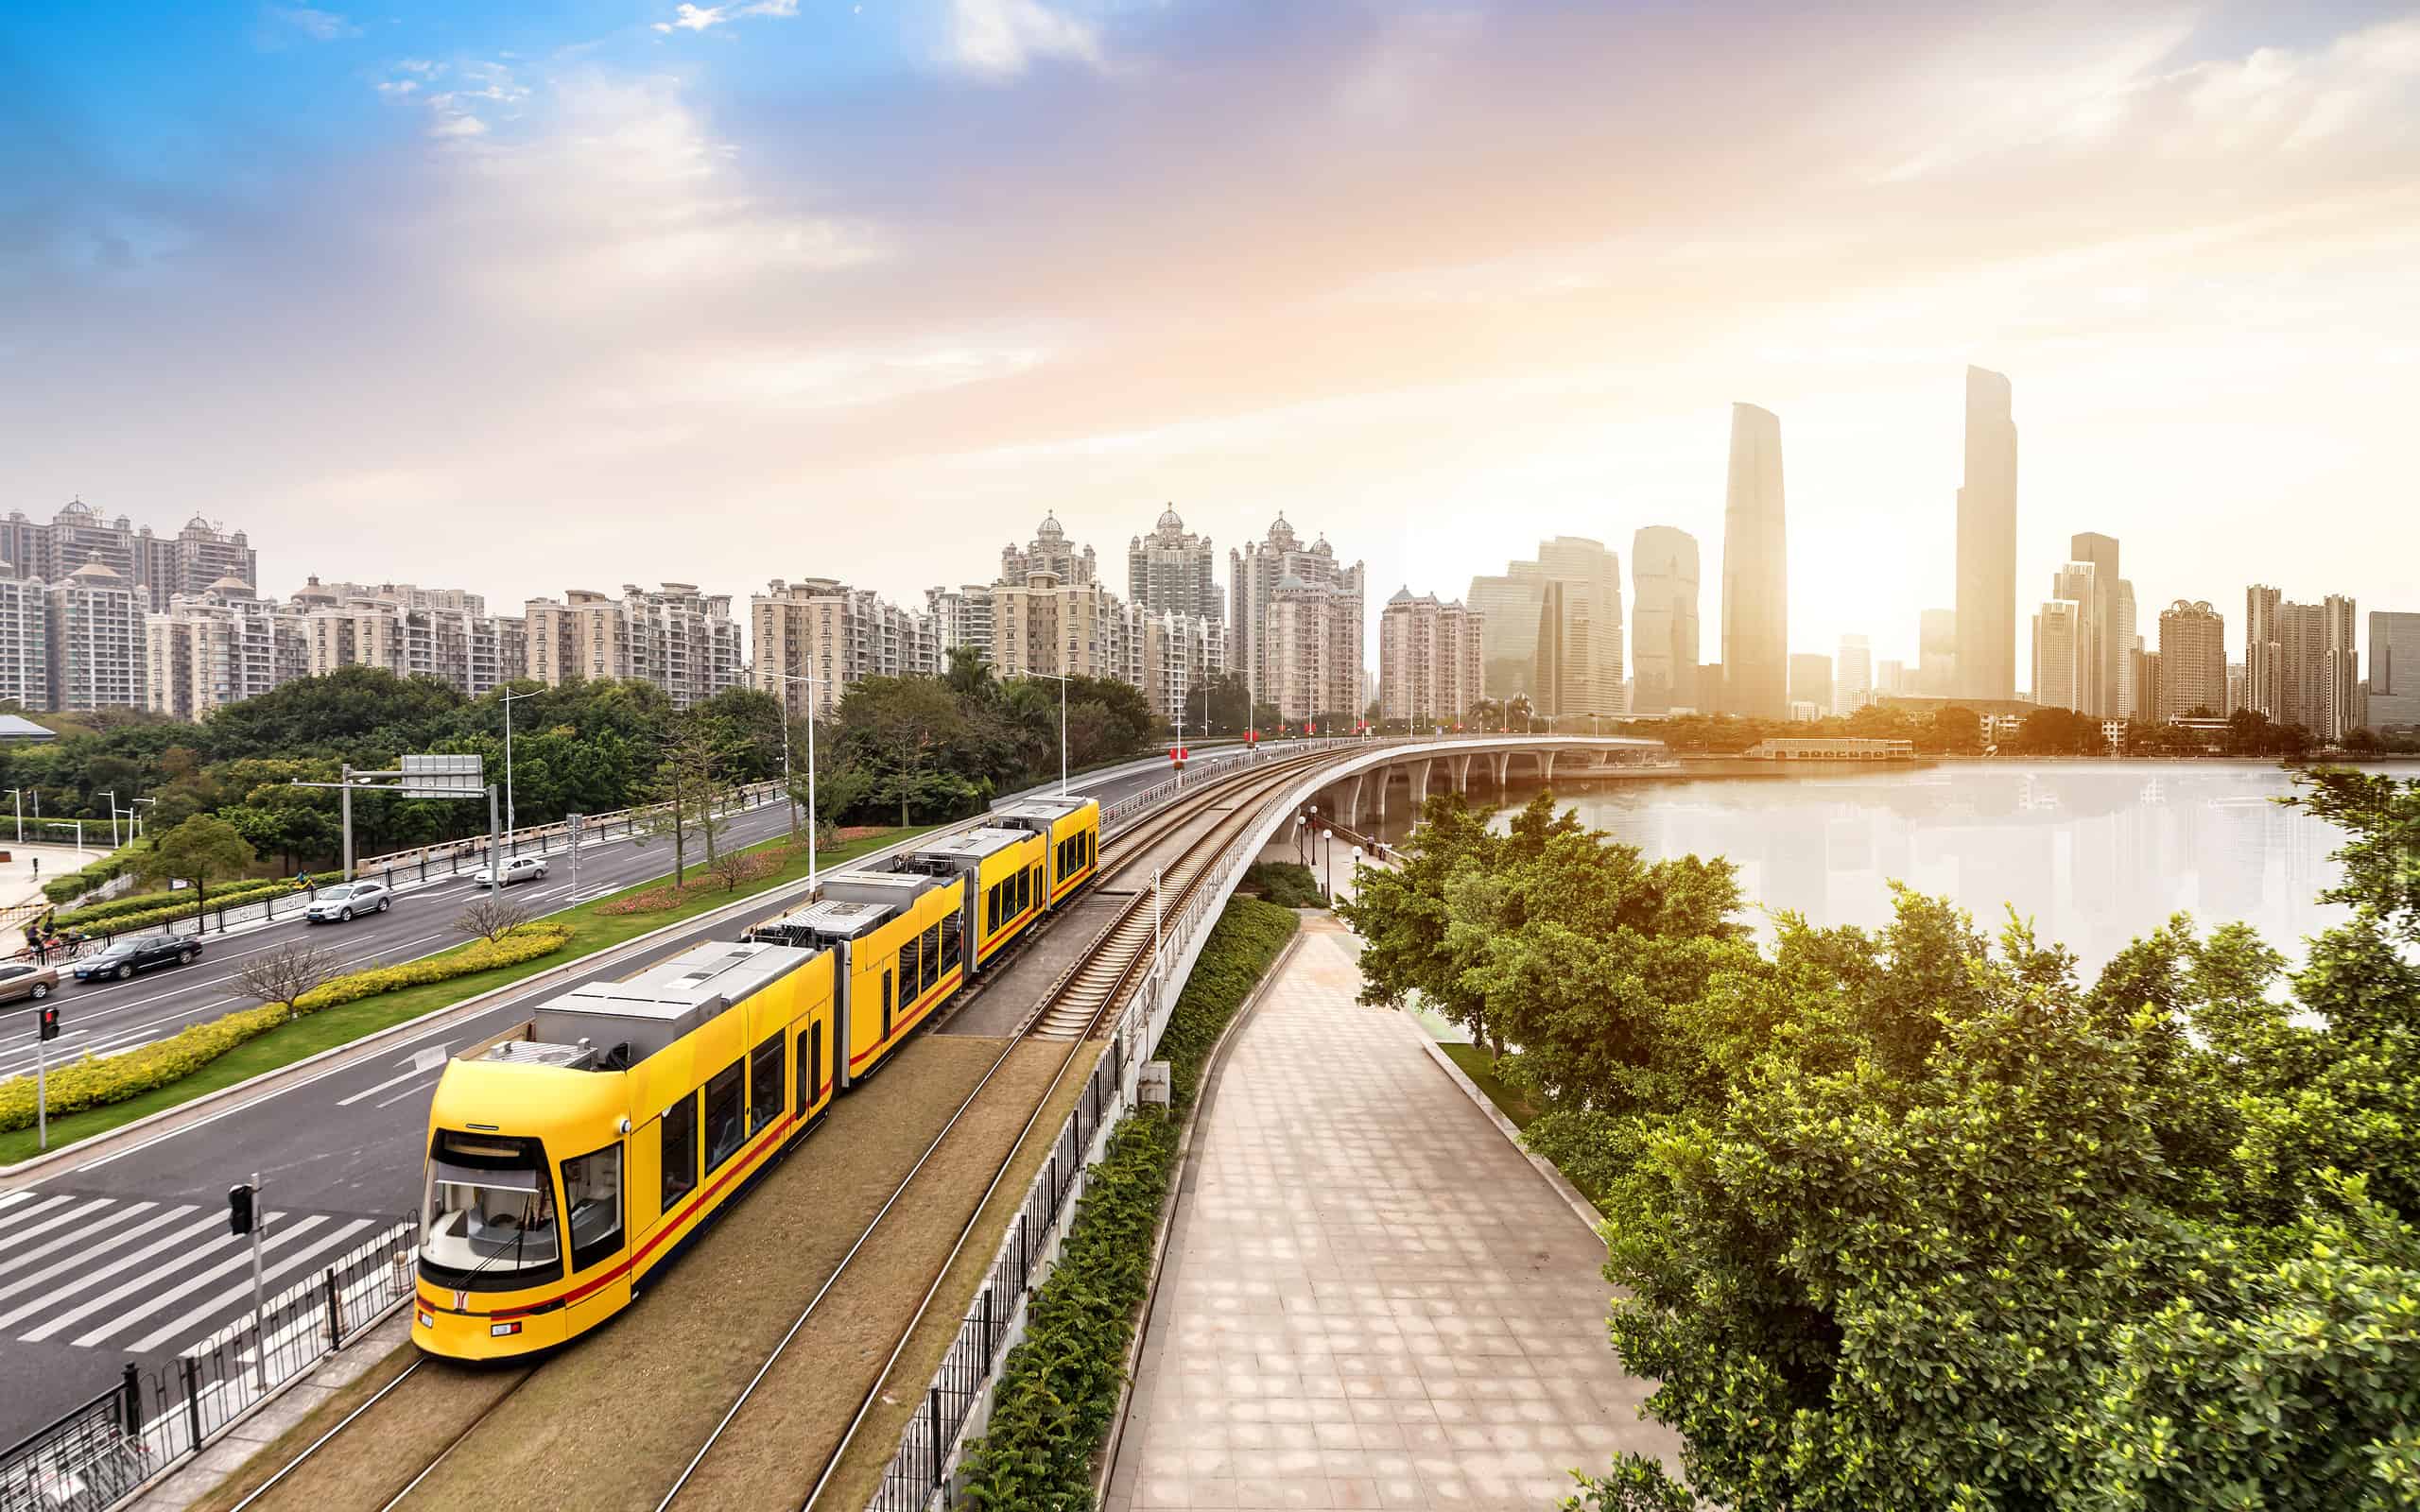 The sightseeing train is driving in the city,guangzhou,china